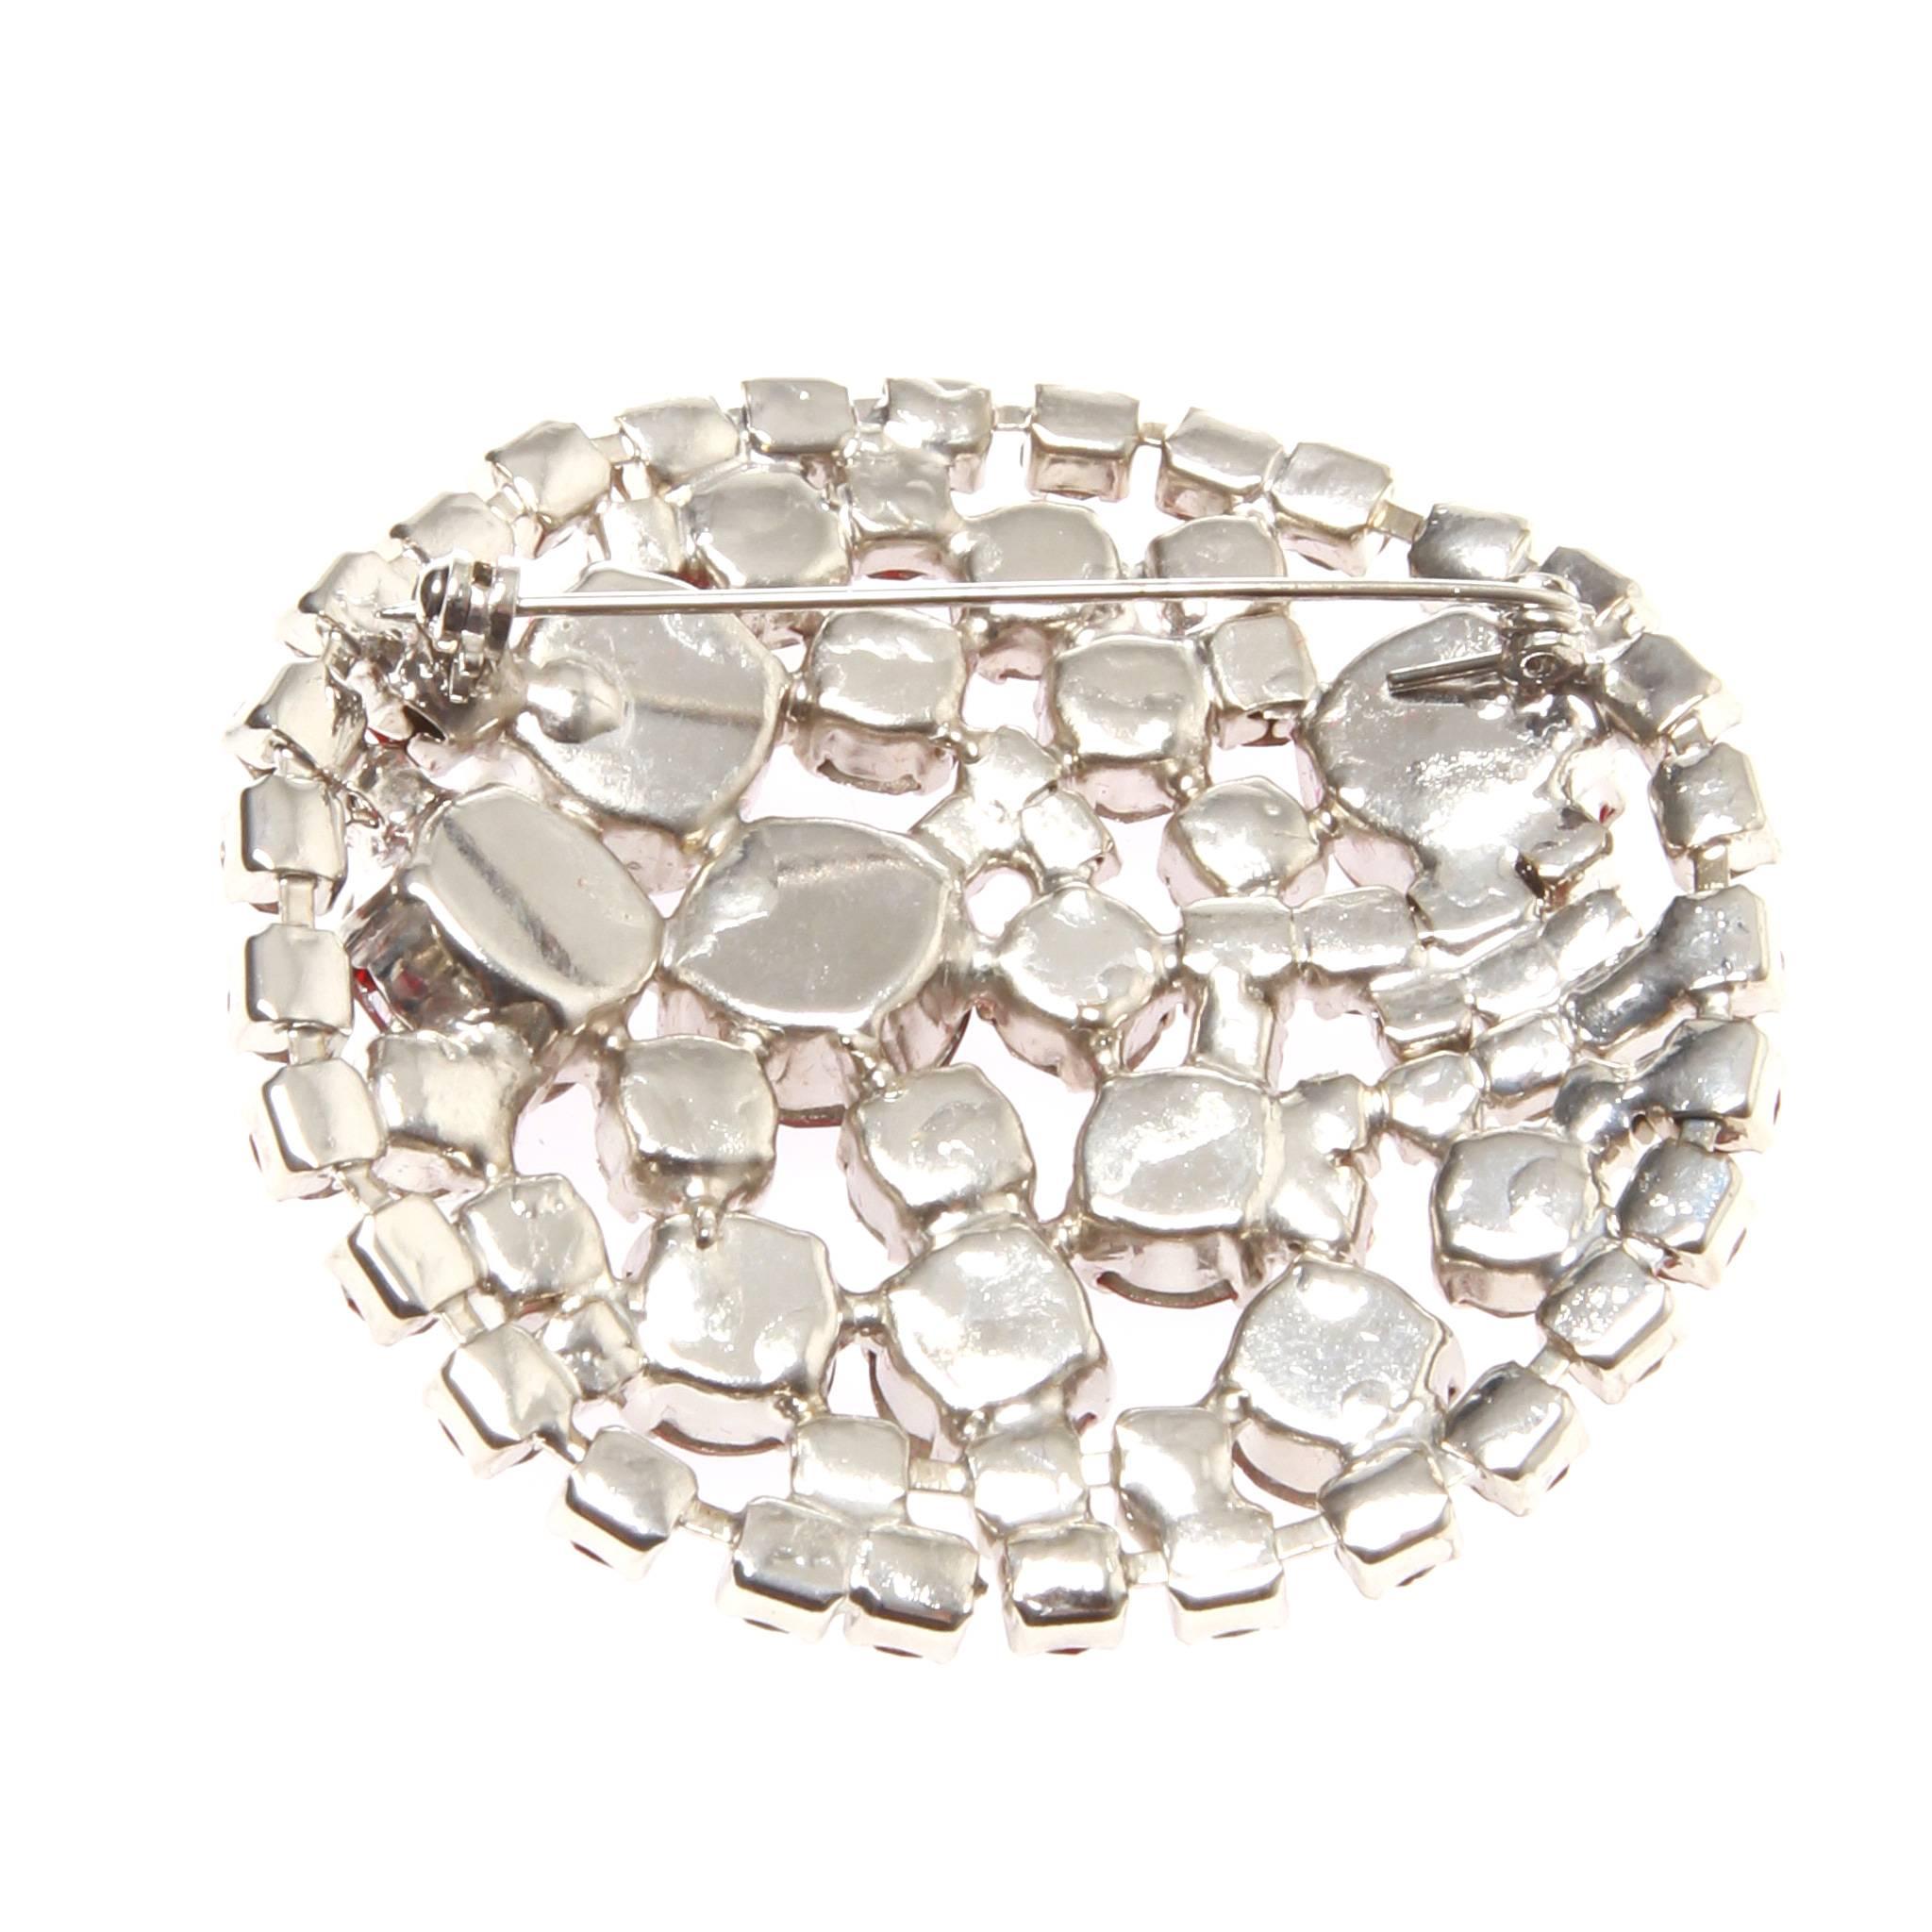 Vintage Christian Lacroix red stone domed brooch, from the collaboration with Avon for the fragrance releases'.

Red crystals are in three varying tones and sizes creating a beautiful cluster of gems. 

Roll needle closure. 

